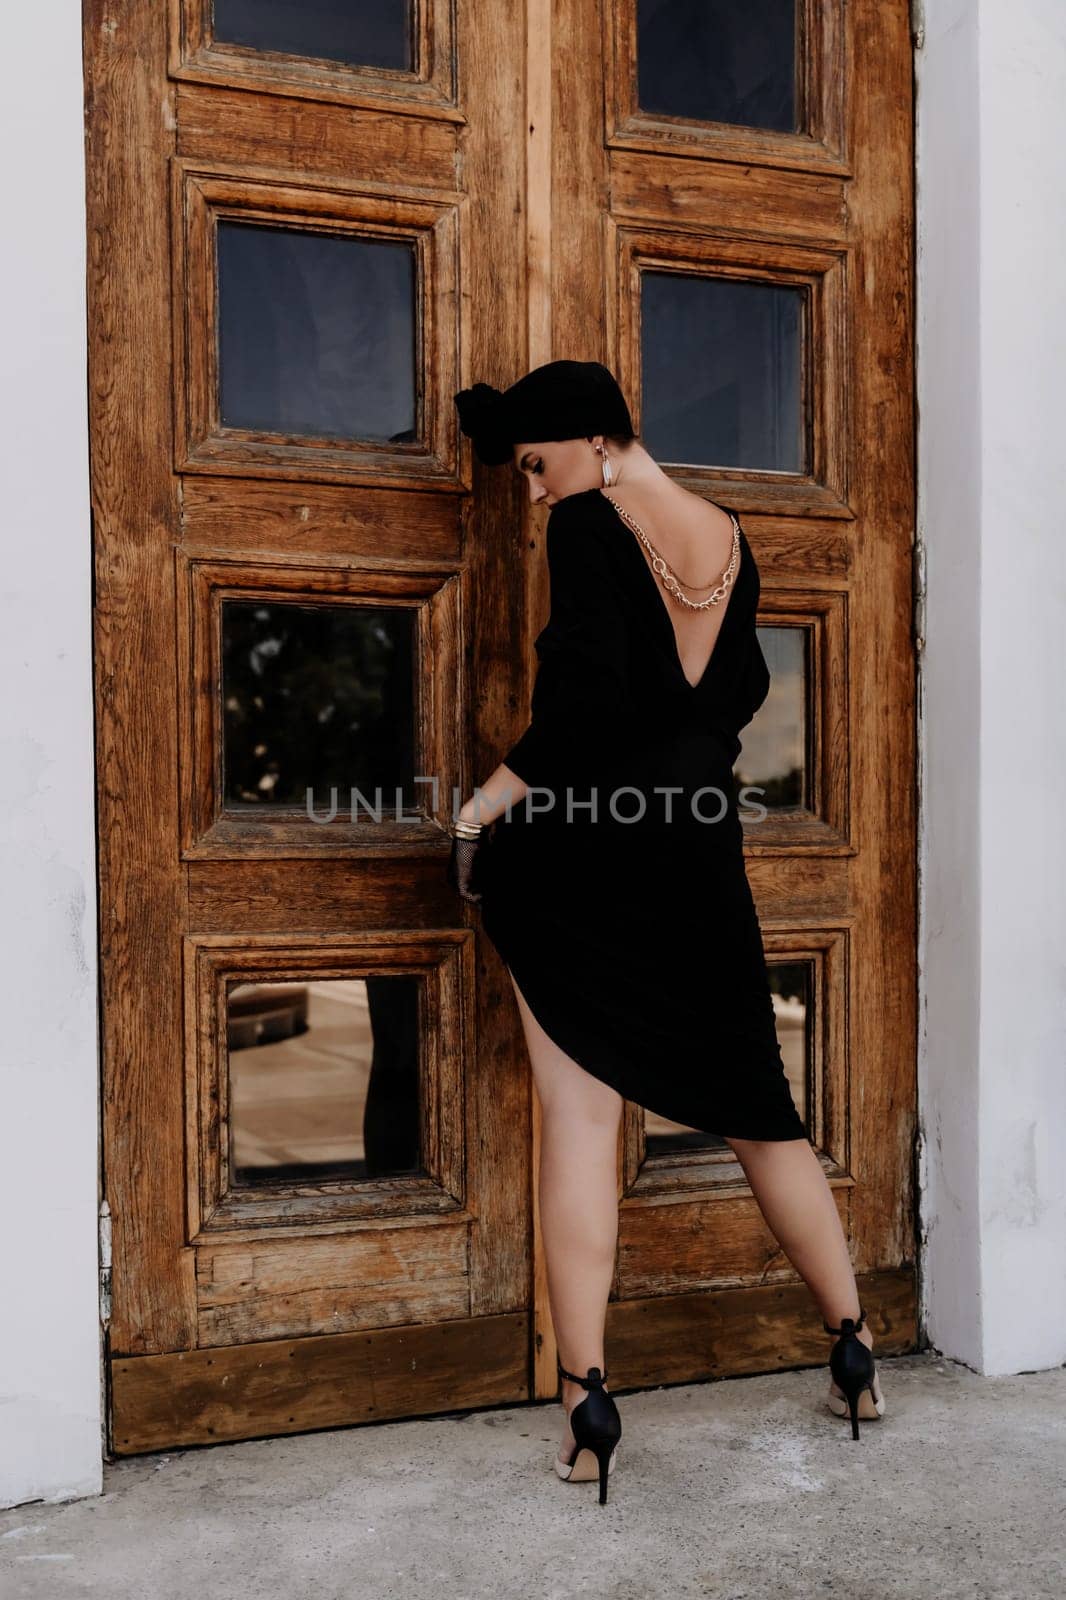 Stylish woman in the city. Fashion photo of a beautiful model in an elegant black dress posing against the backdrop of a building on a city street.